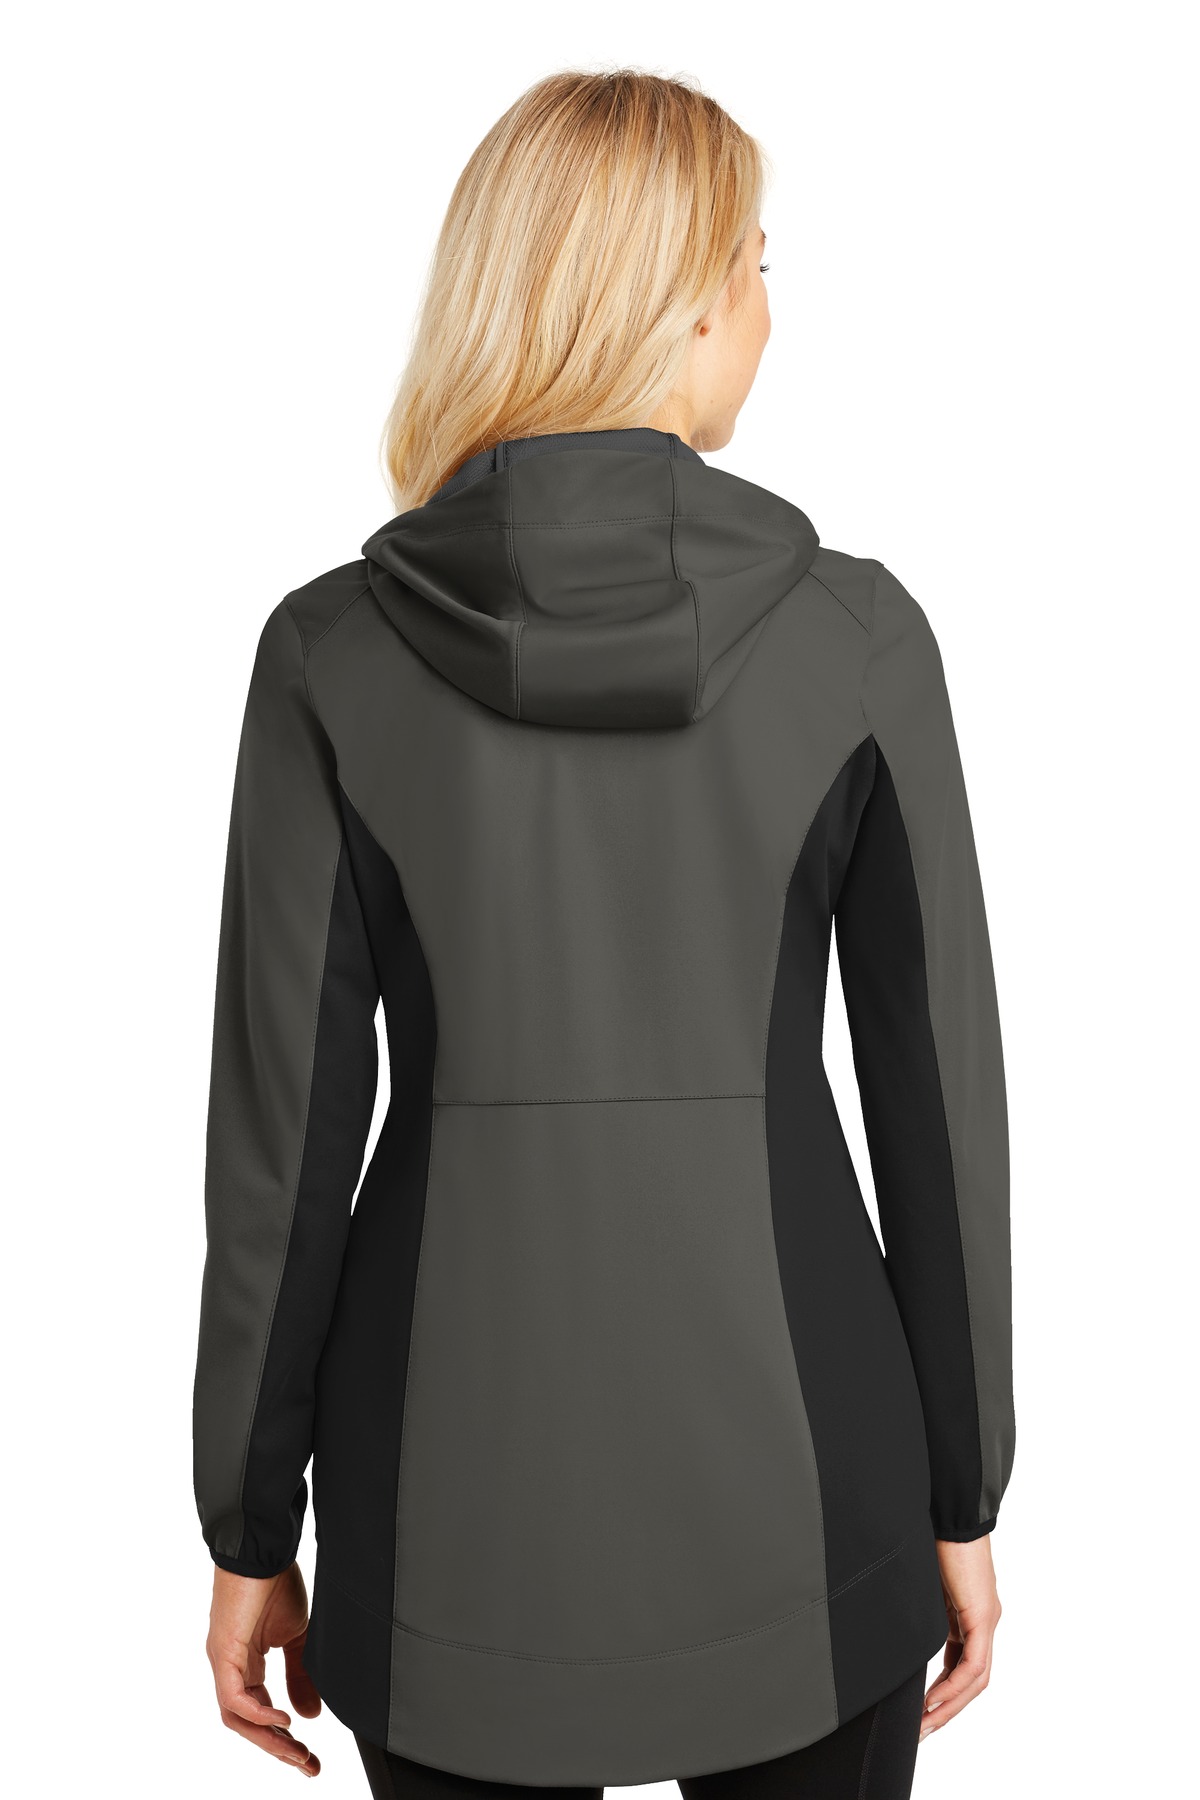 Port Authority Ladies Active Hooded Soft Shell Jacket-L (Grey Steel/ Deep Black) - image 2 of 6